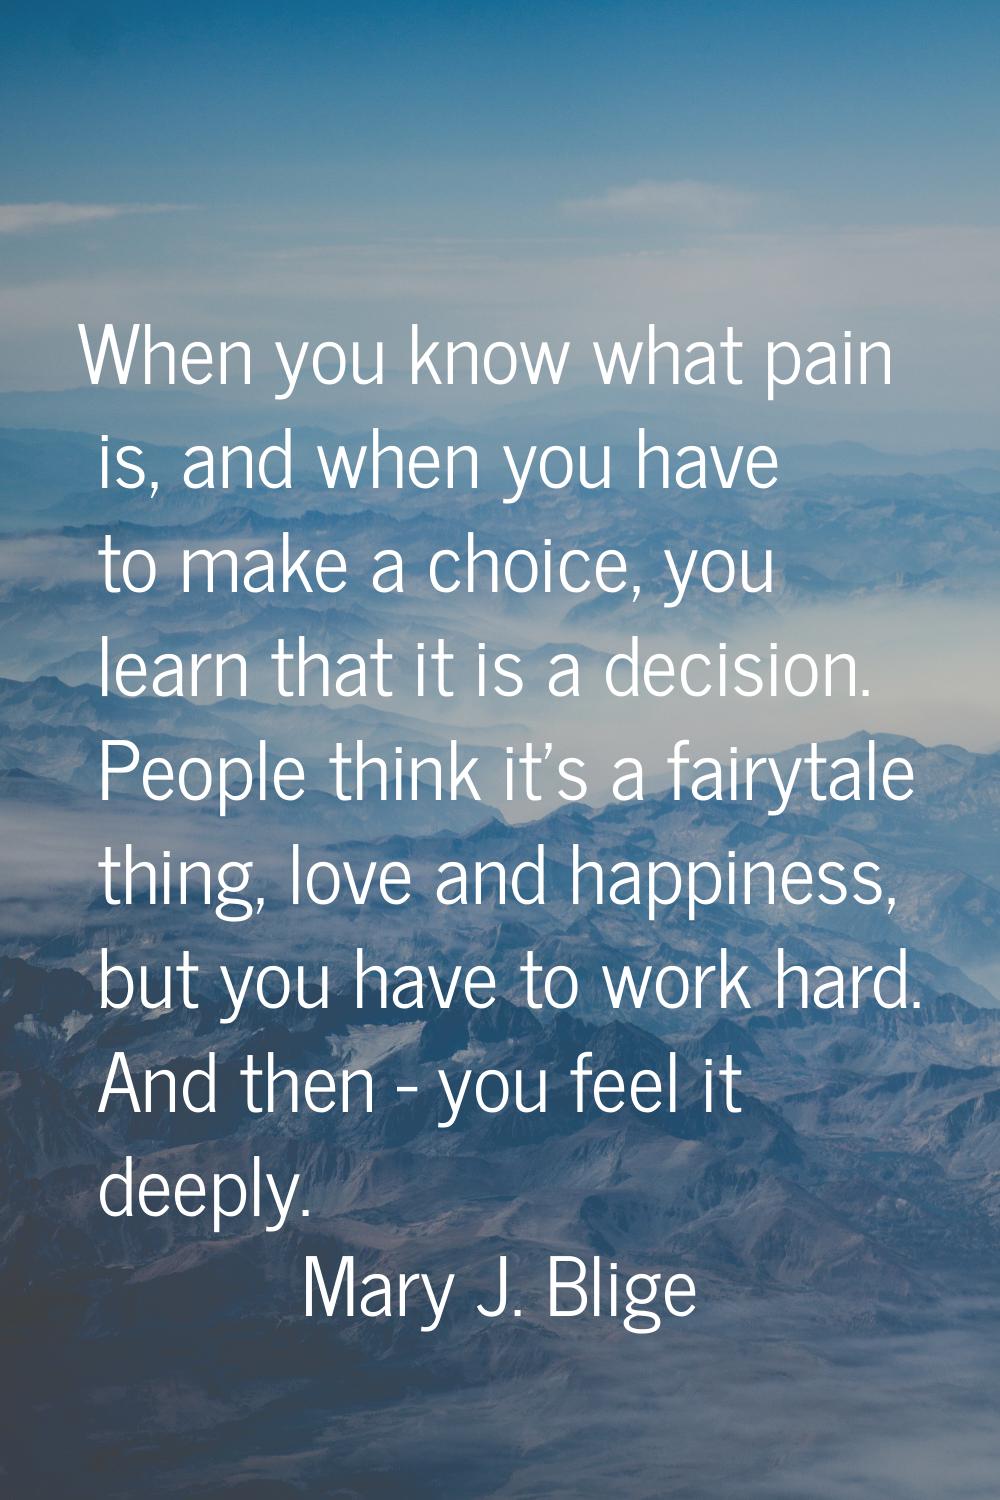 When you know what pain is, and when you have to make a choice, you learn that it is a decision. Pe